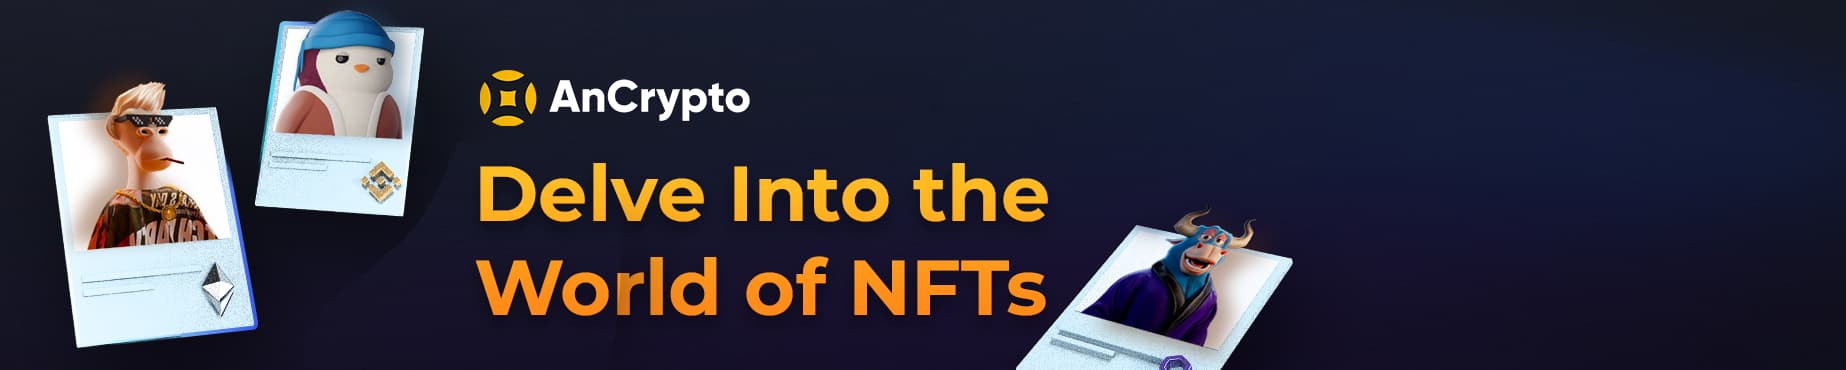 delve into the world of NFTs cta buttons